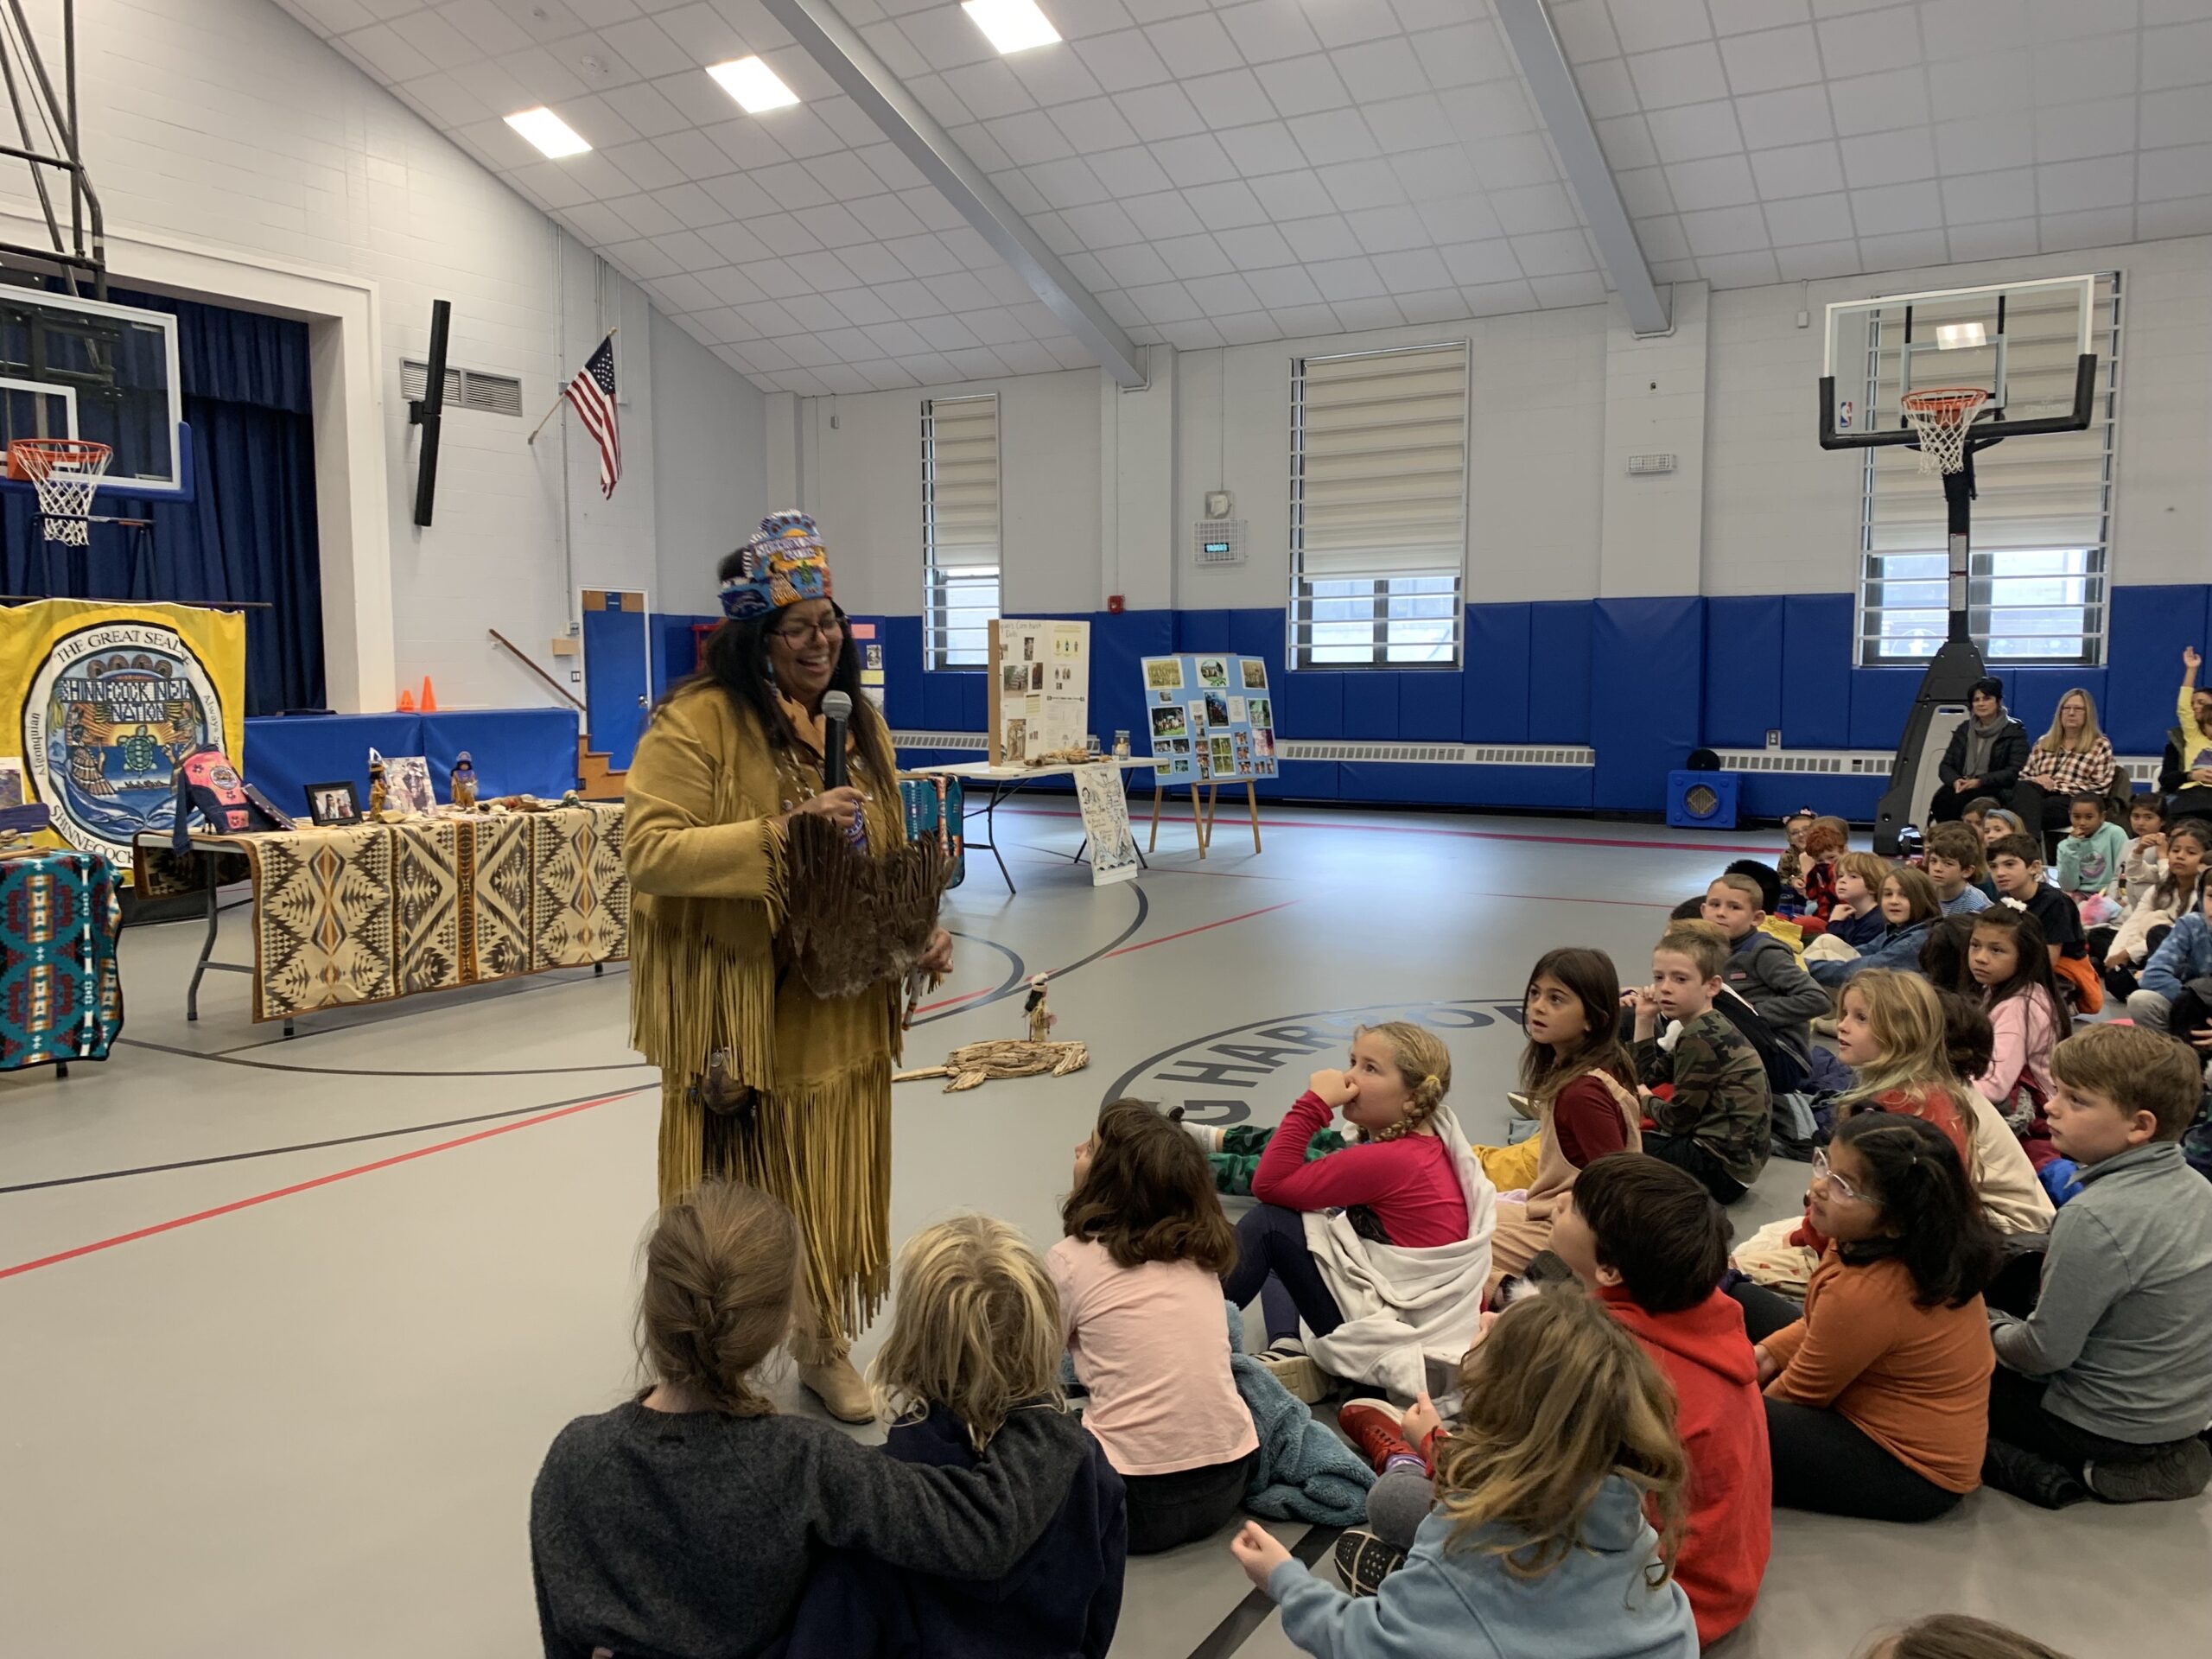 The Sag Harbor Elementary third graders gathered  to hear from special guest speaker Denise Silva-Dennis in celebration of National Native American Heritage month. “We had a wonderful time listening to her stories about her Shinnecock Nation tribe and culture,” said third grade teacher Chris Kline. COURTESY SAG HARBOR SCHOOL DISTRICT